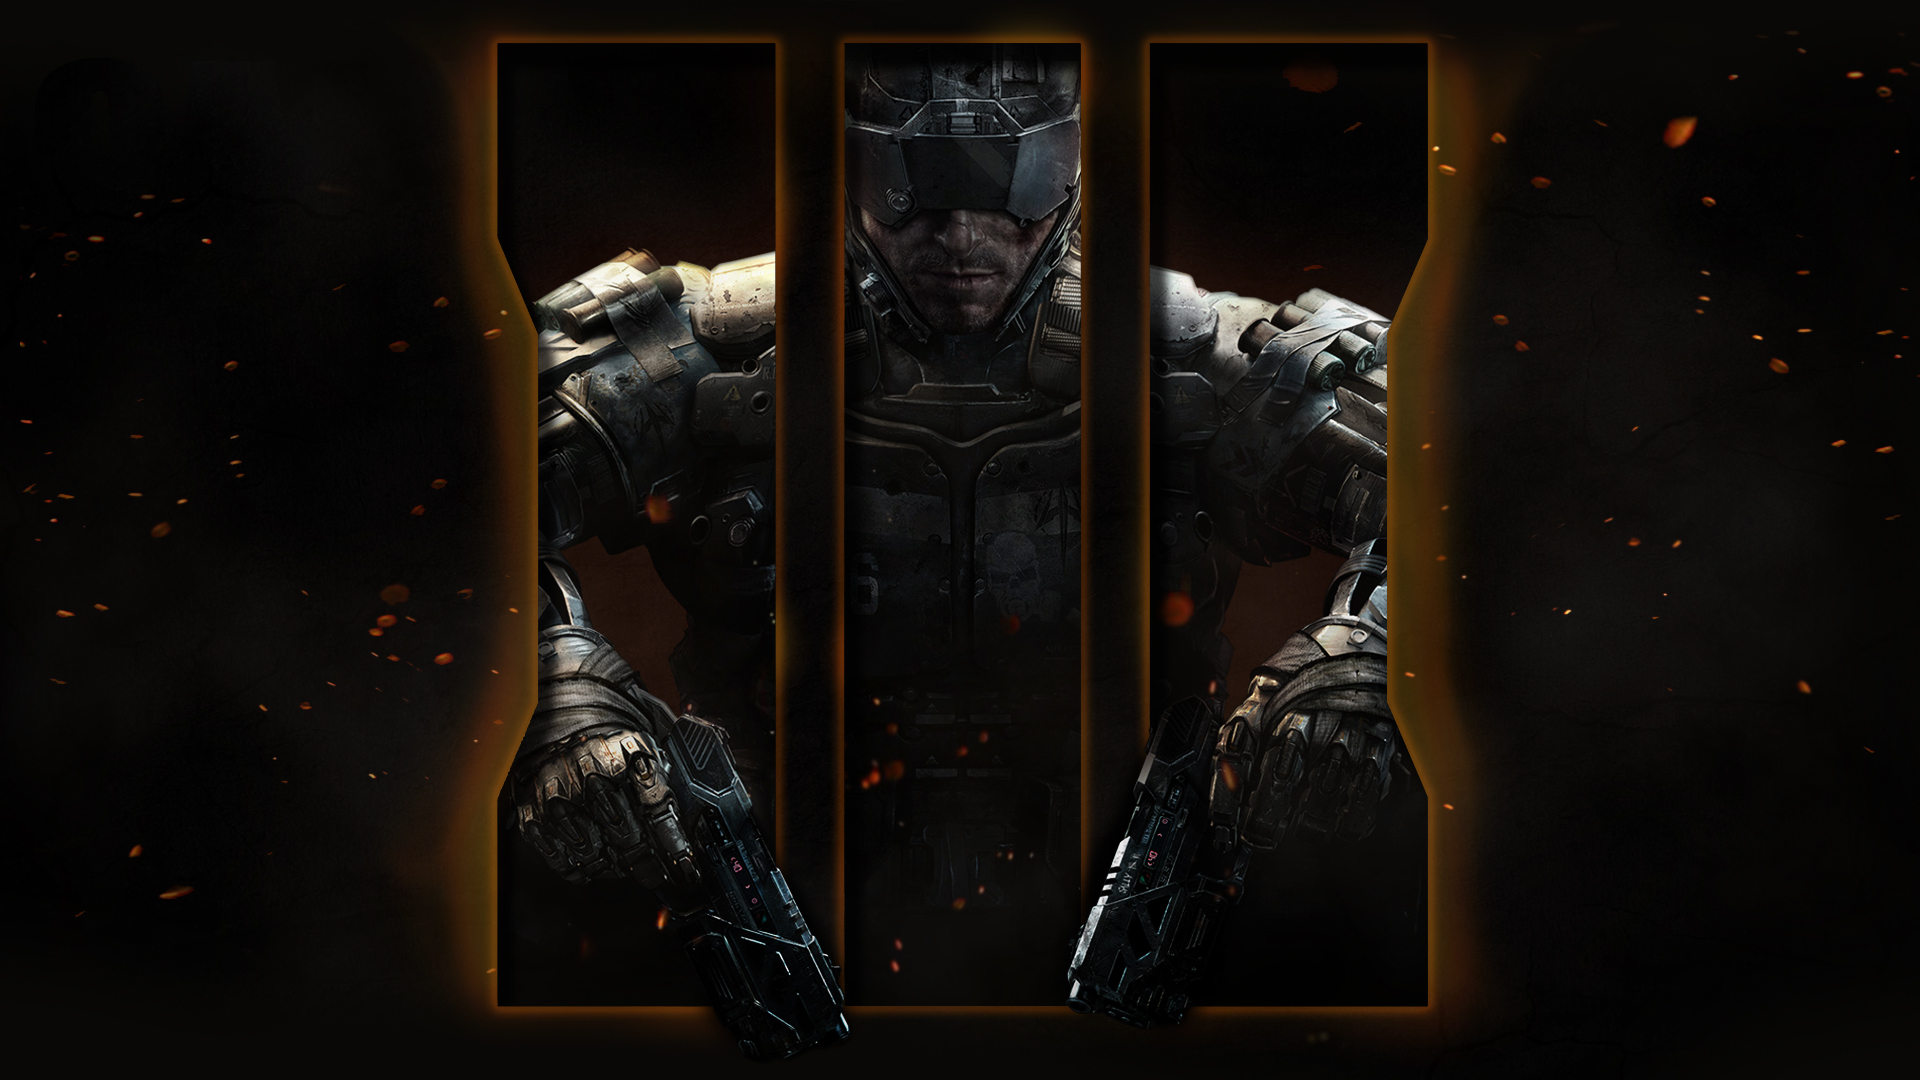 Call of Duty Black Ops III Wallpapers Pictures Images